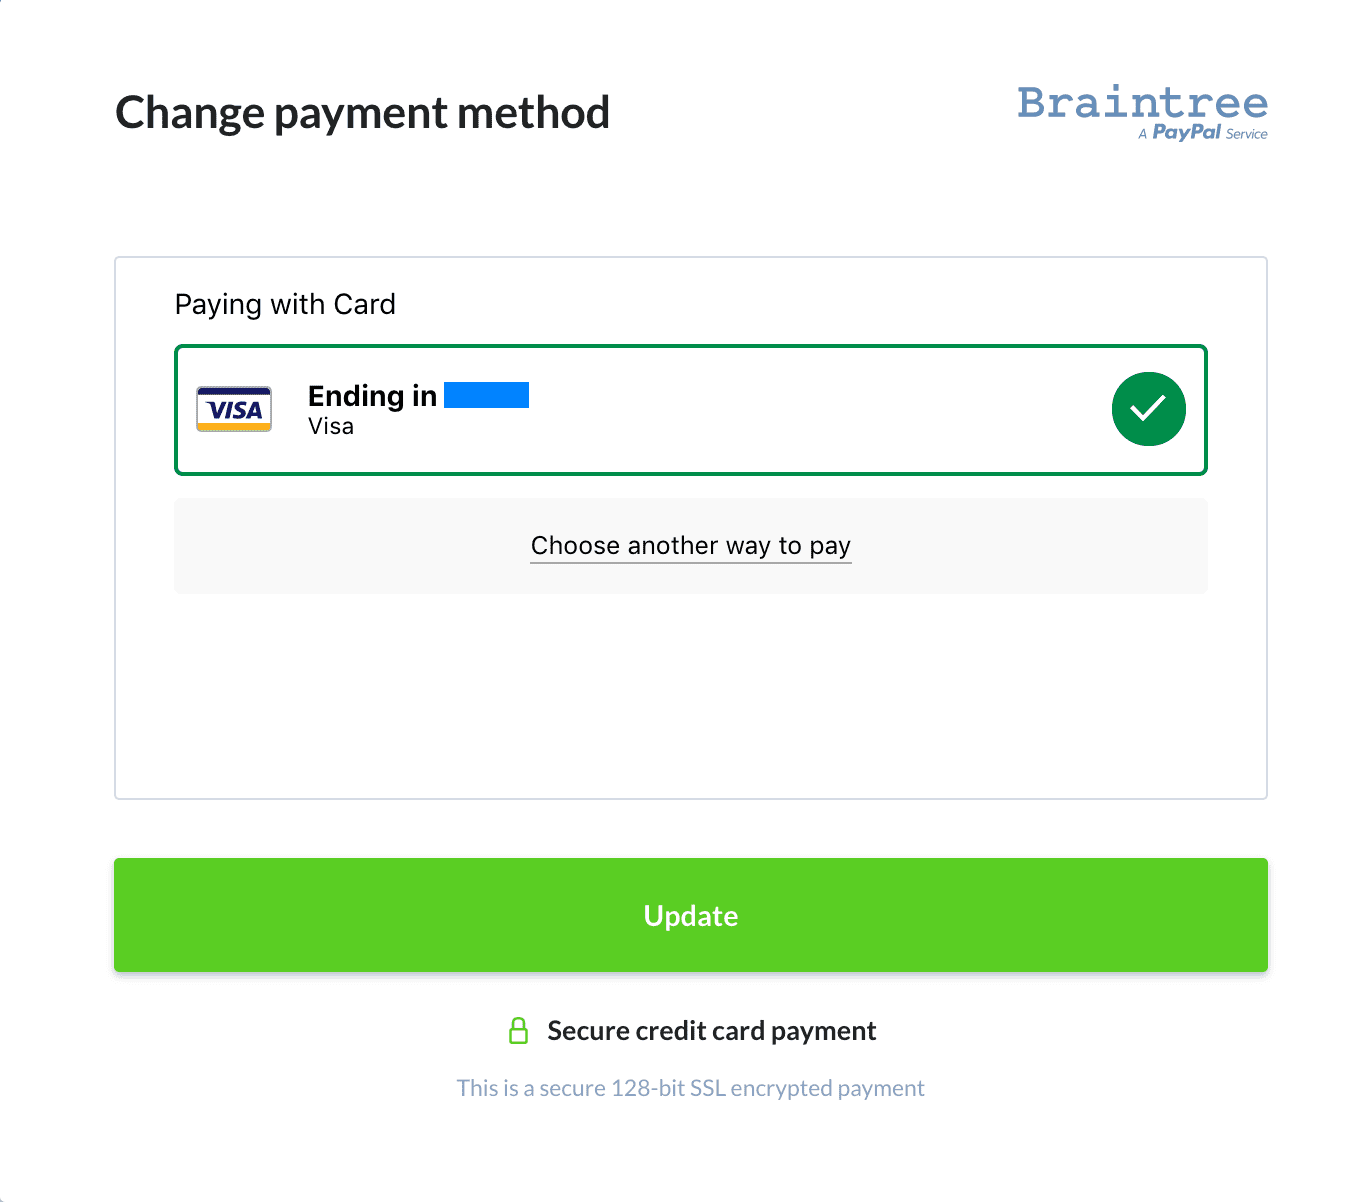 Updating payment method